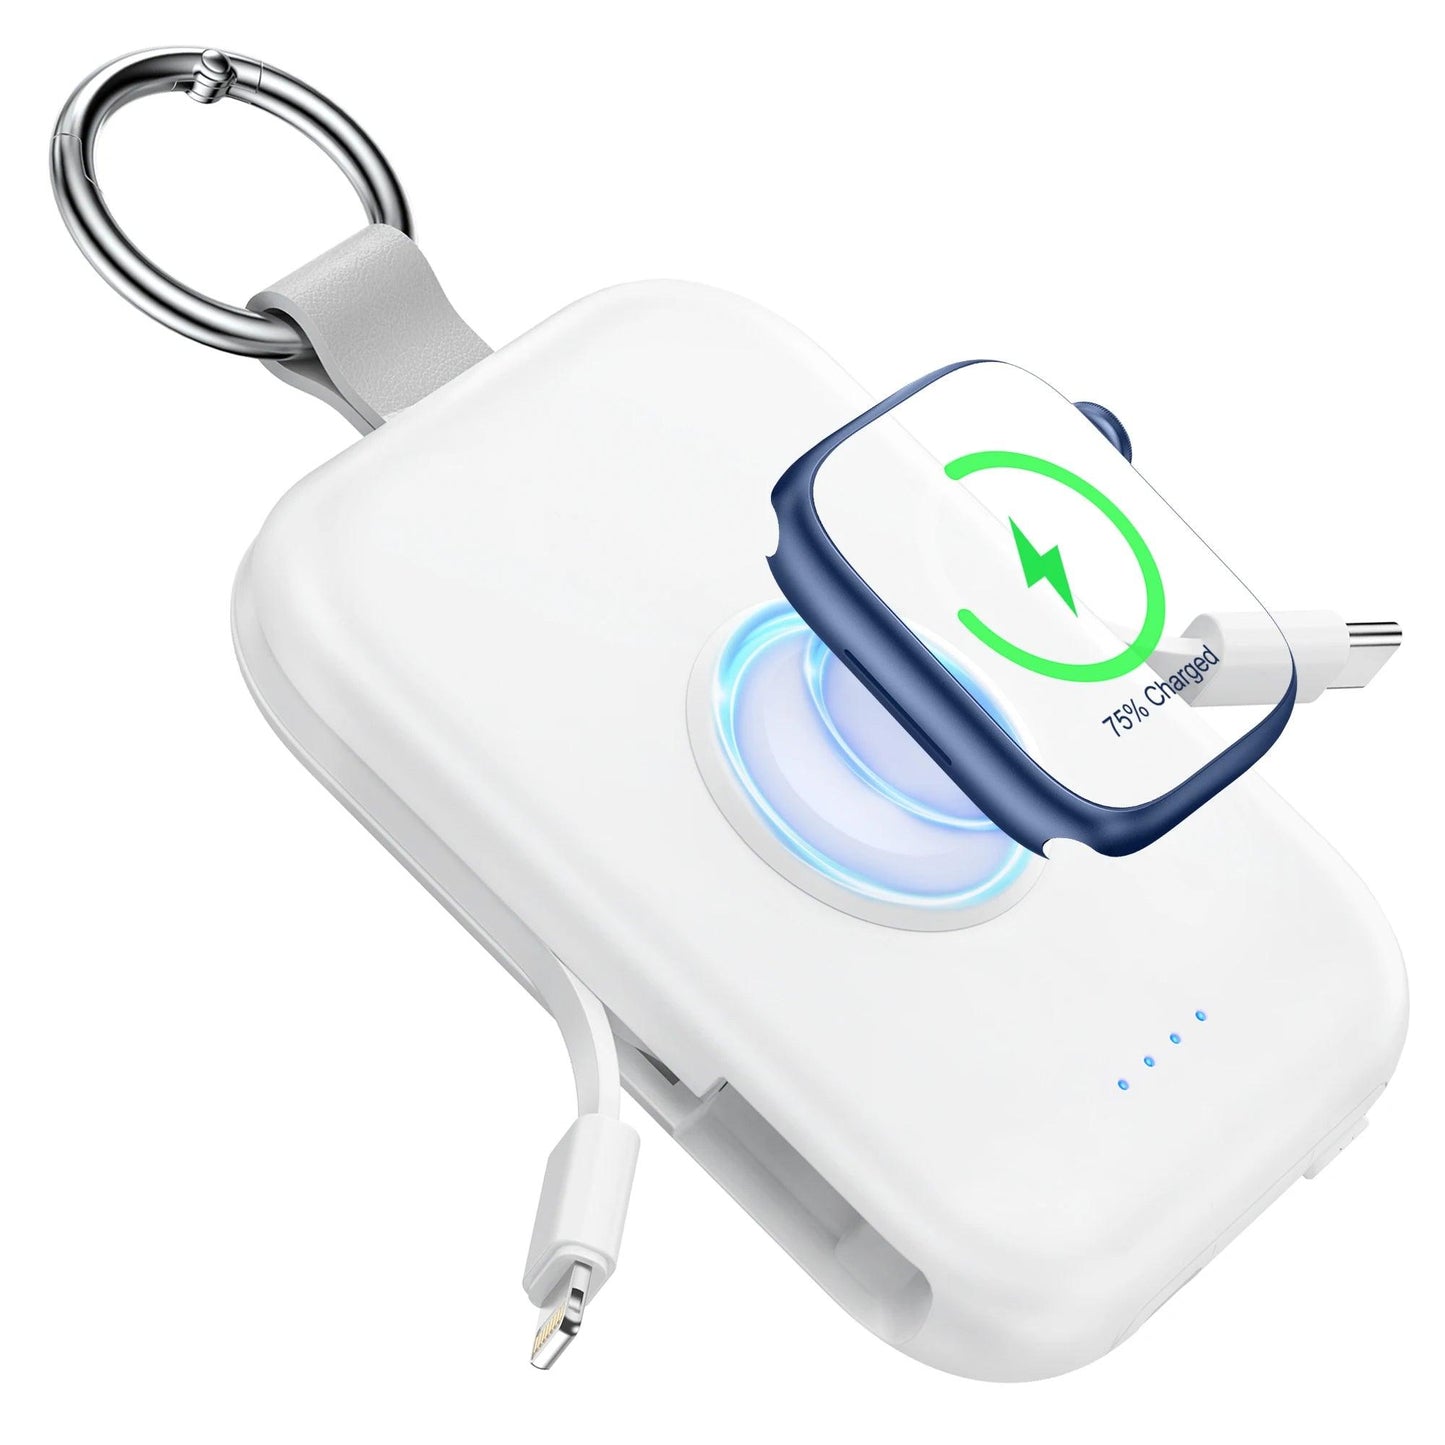 Portable Power Bank for iPhone | apple watch wireless charger |Diversi